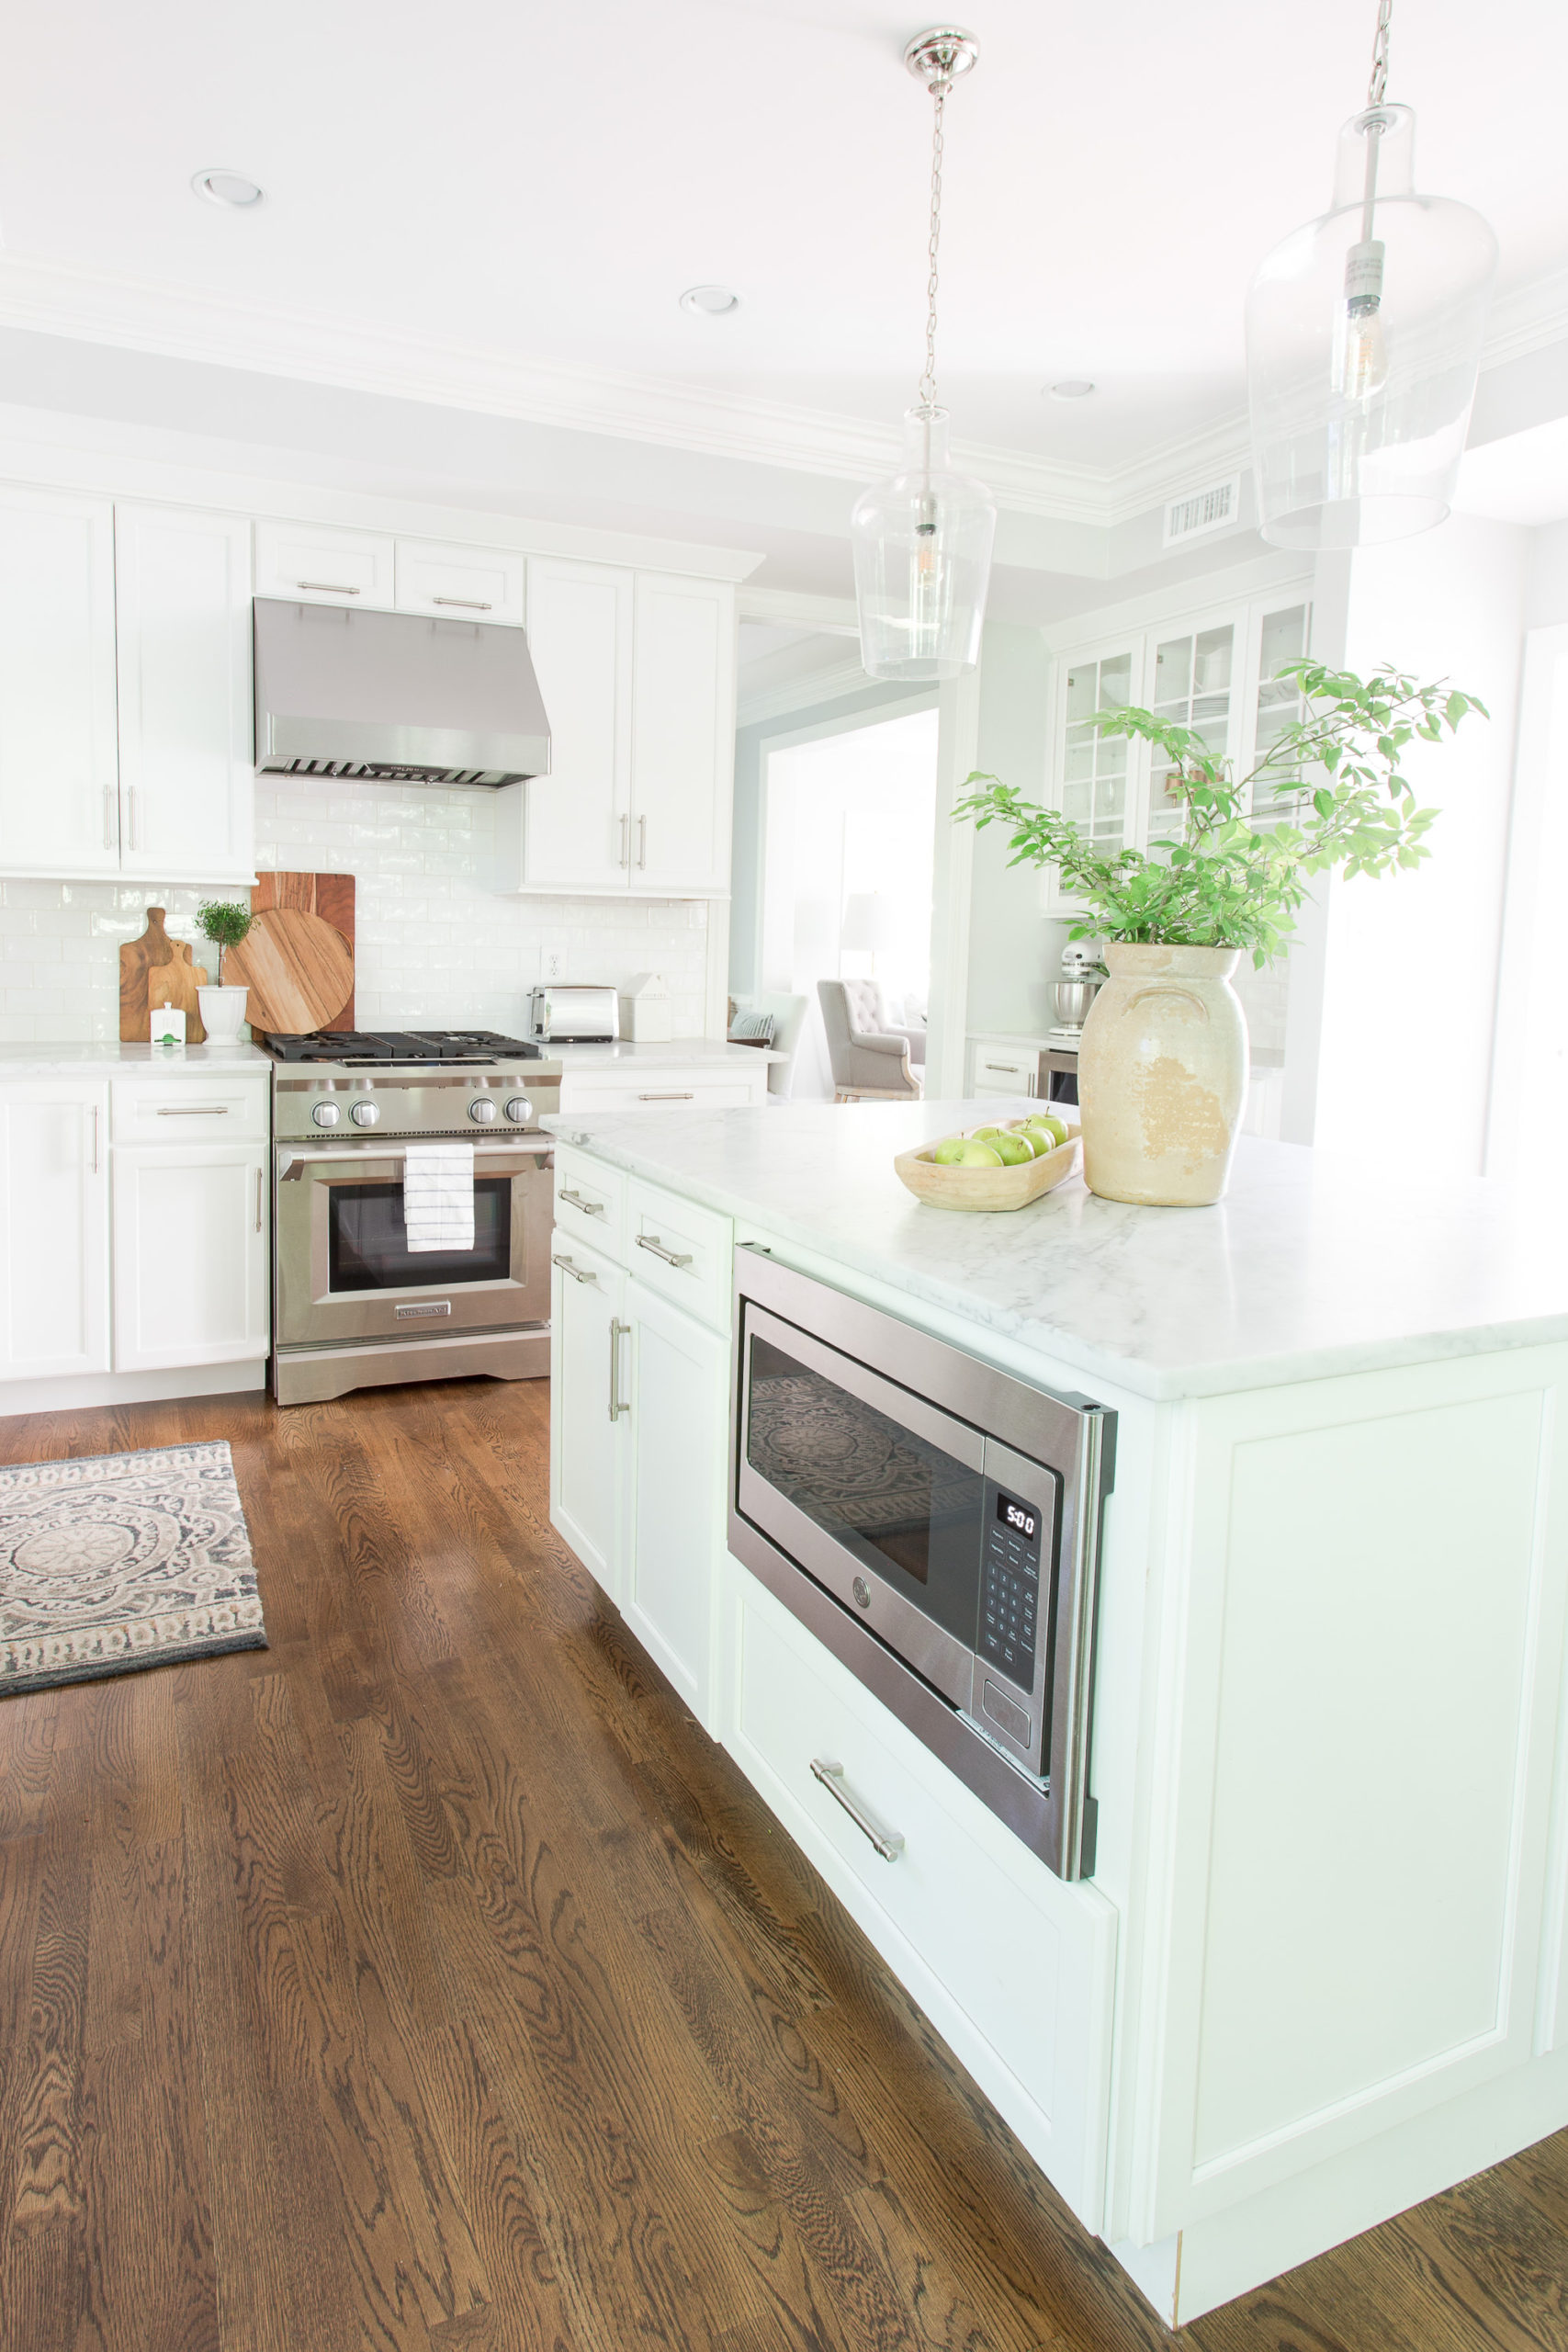 White kitchen looking at island with microwave, gas range and vase of greenery on island